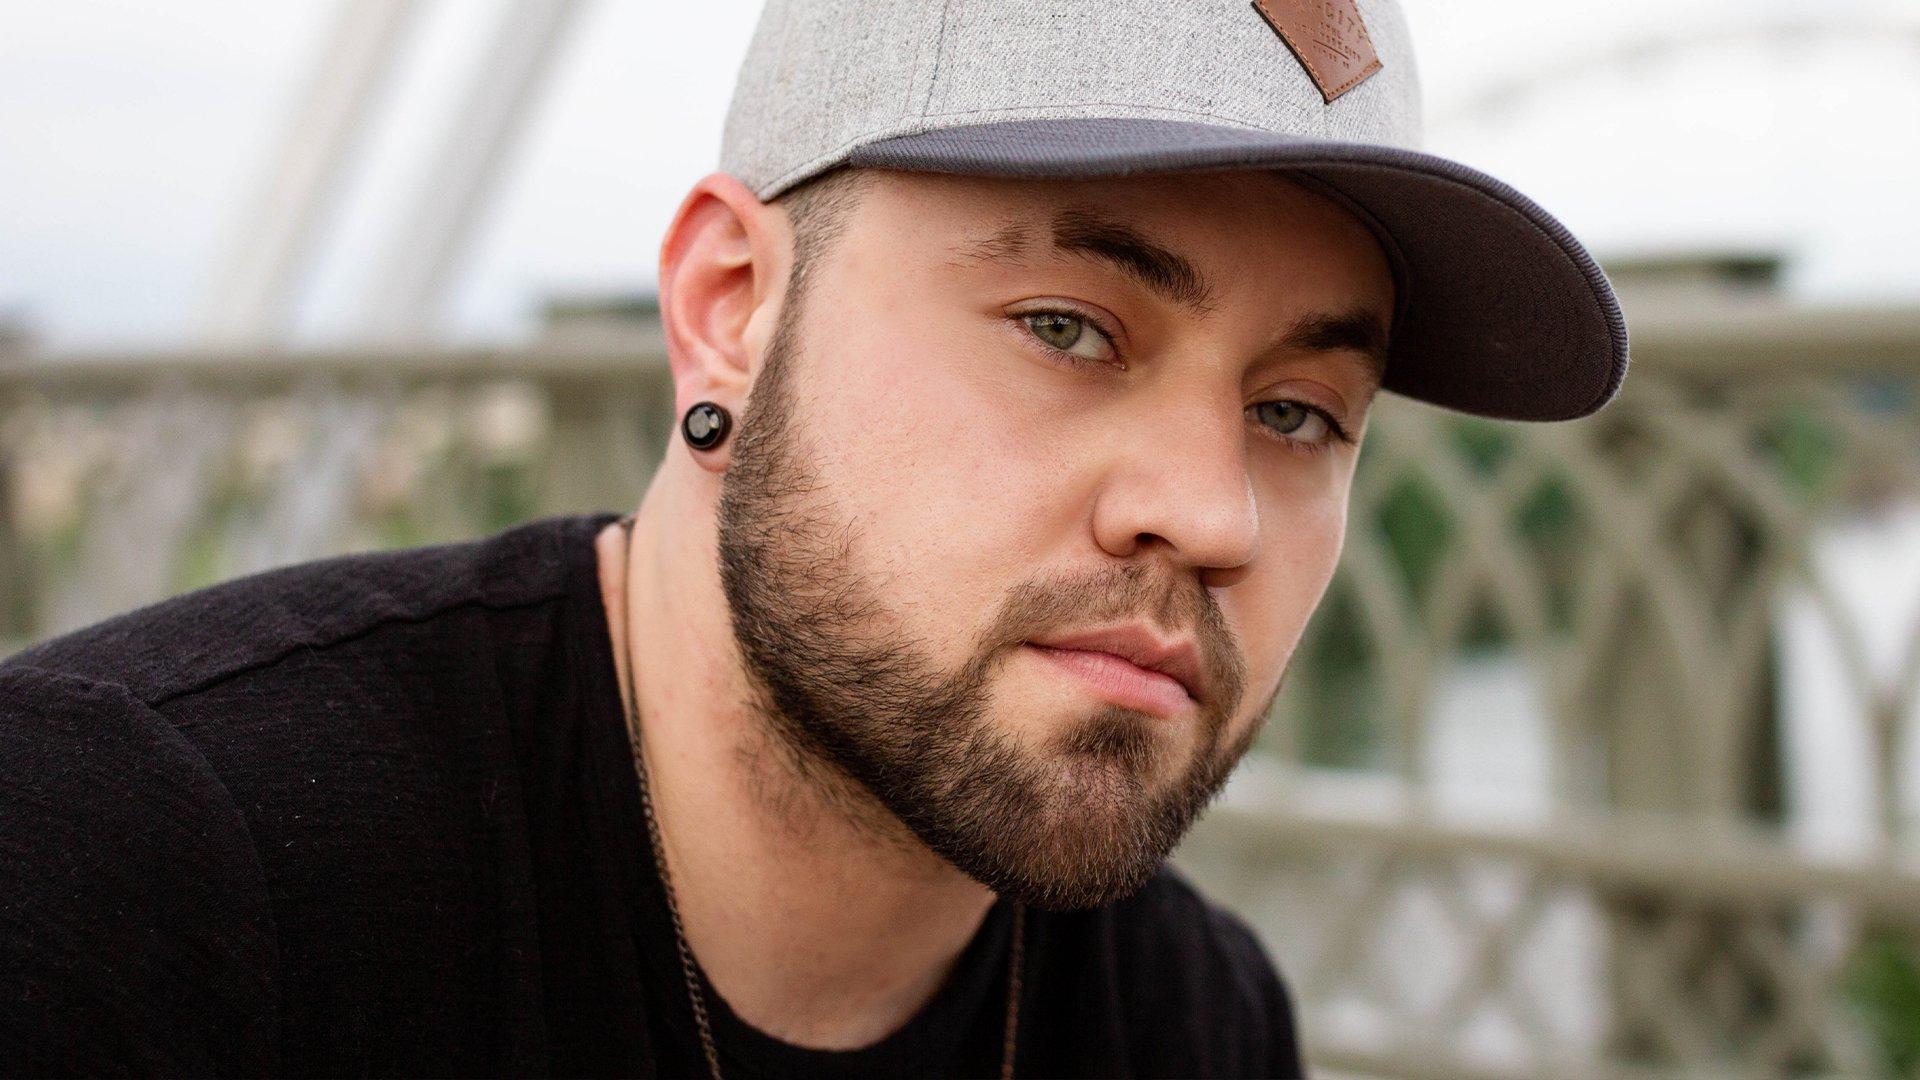 Closeup photo of singer/songwriter Brody Ray wearing a baseball cap